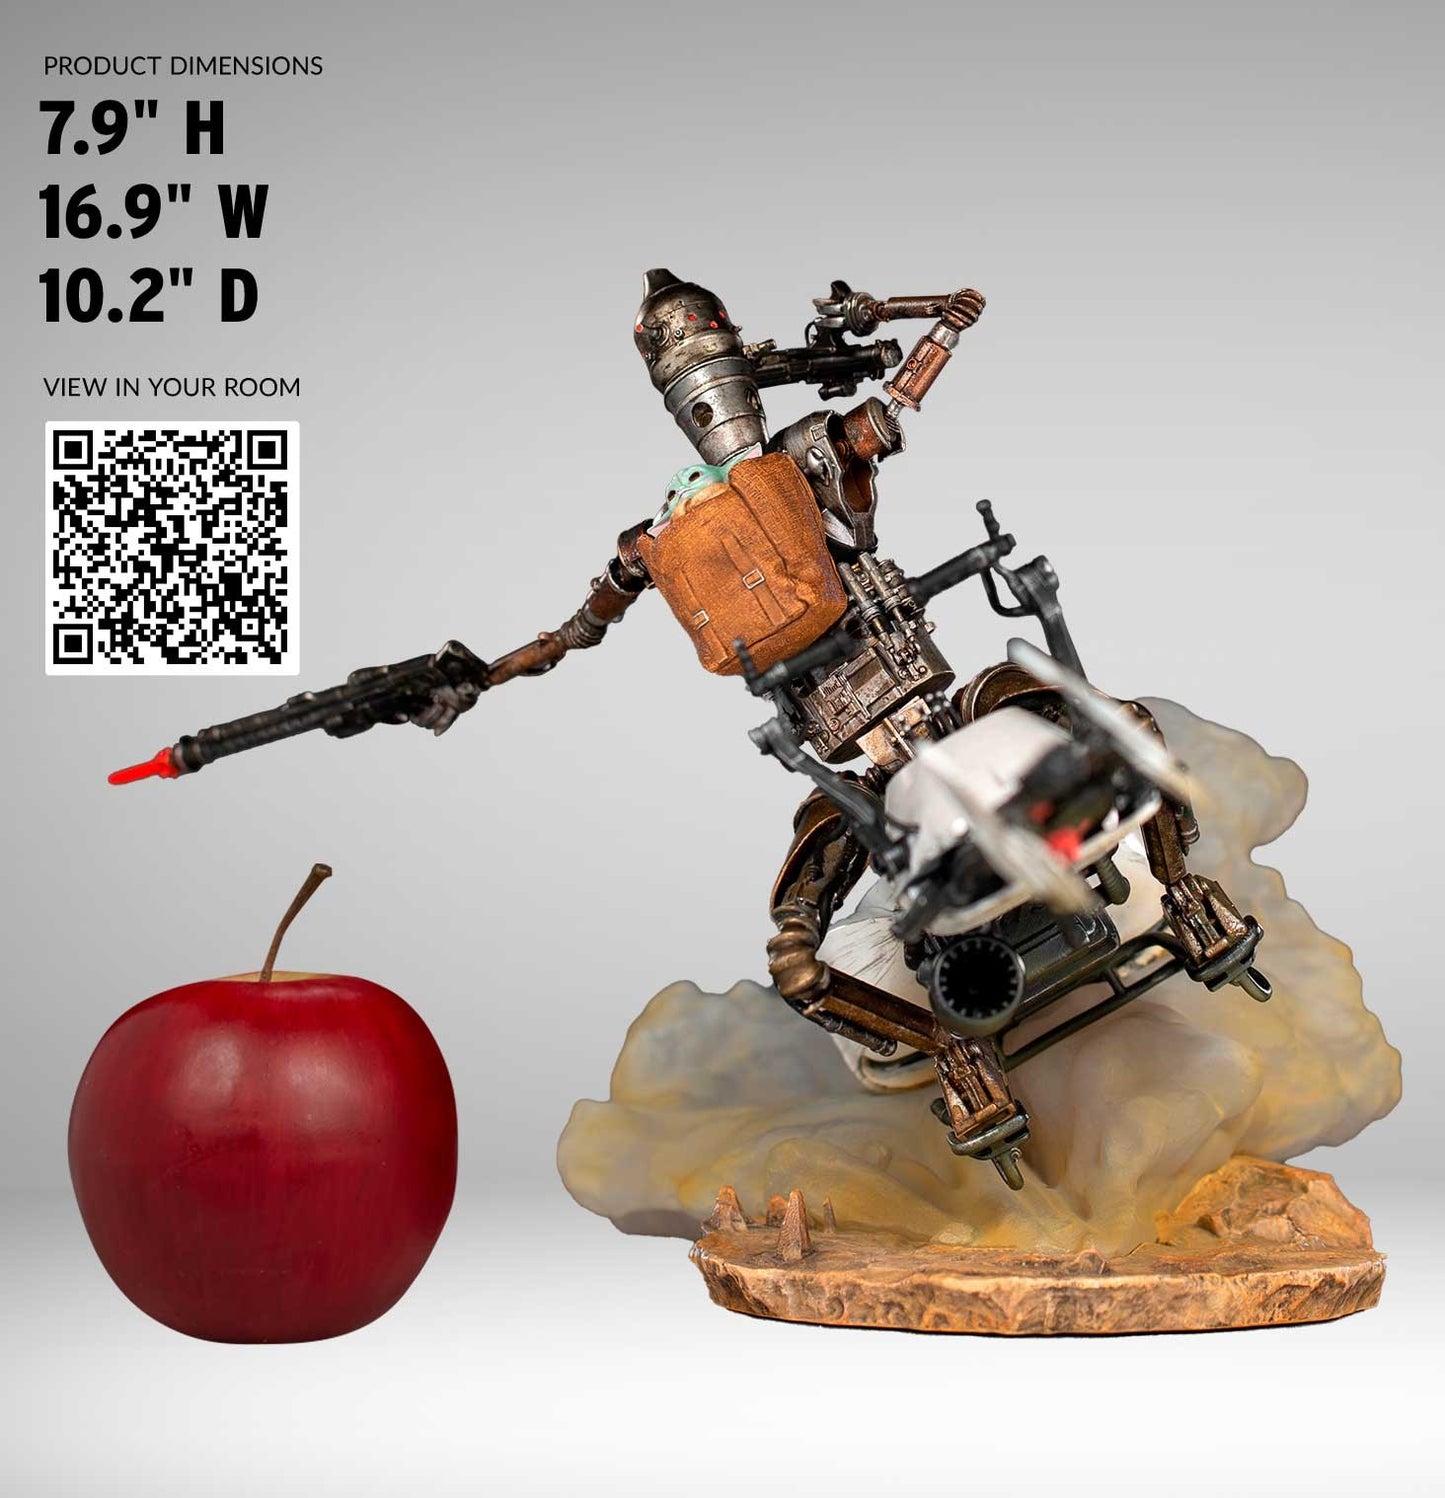 IG-11 & The Child Deluxe 1:10 Statue